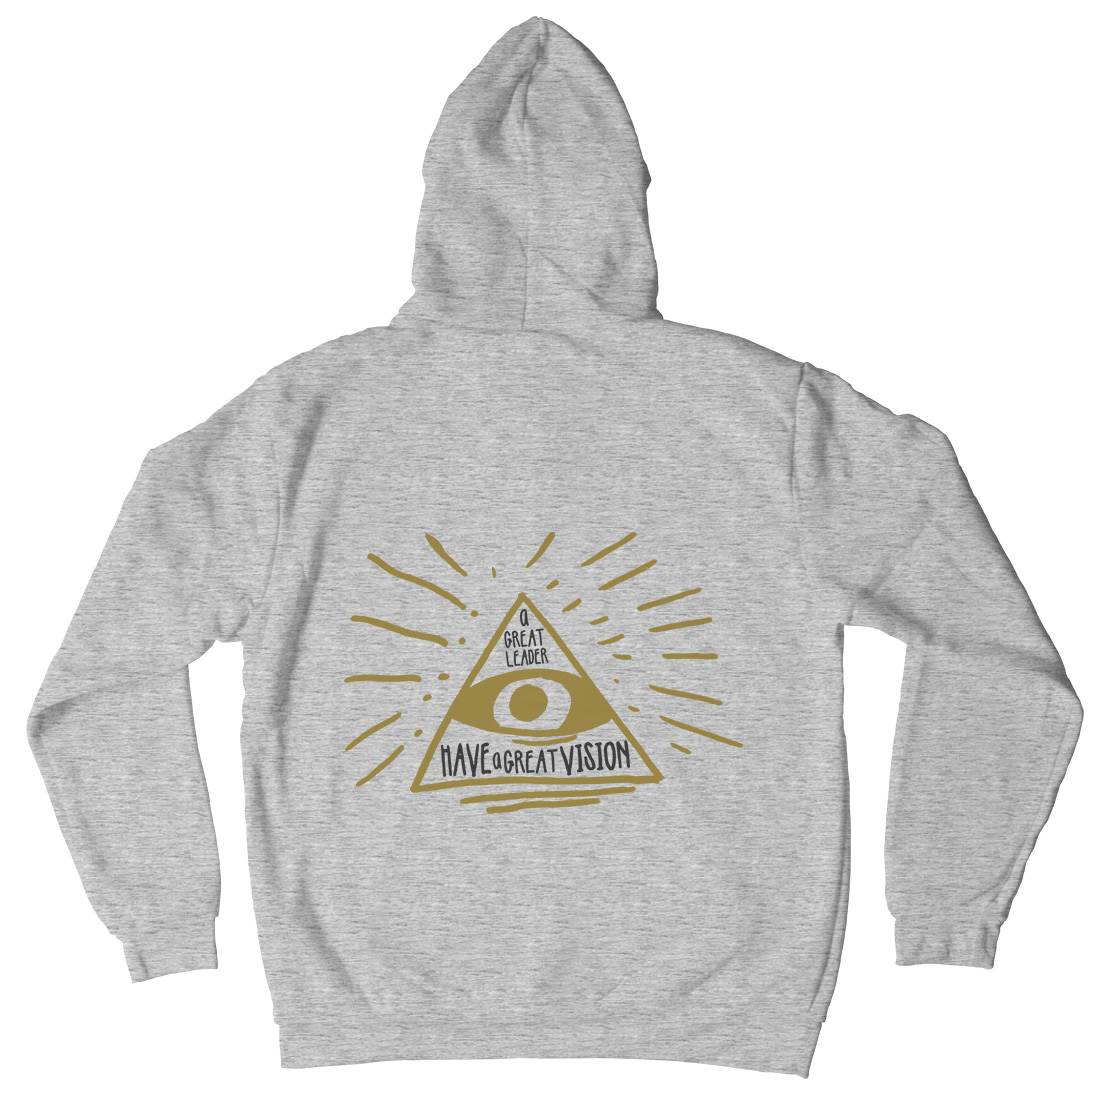 Great Leader Mens Hoodie With Pocket Illuminati A322